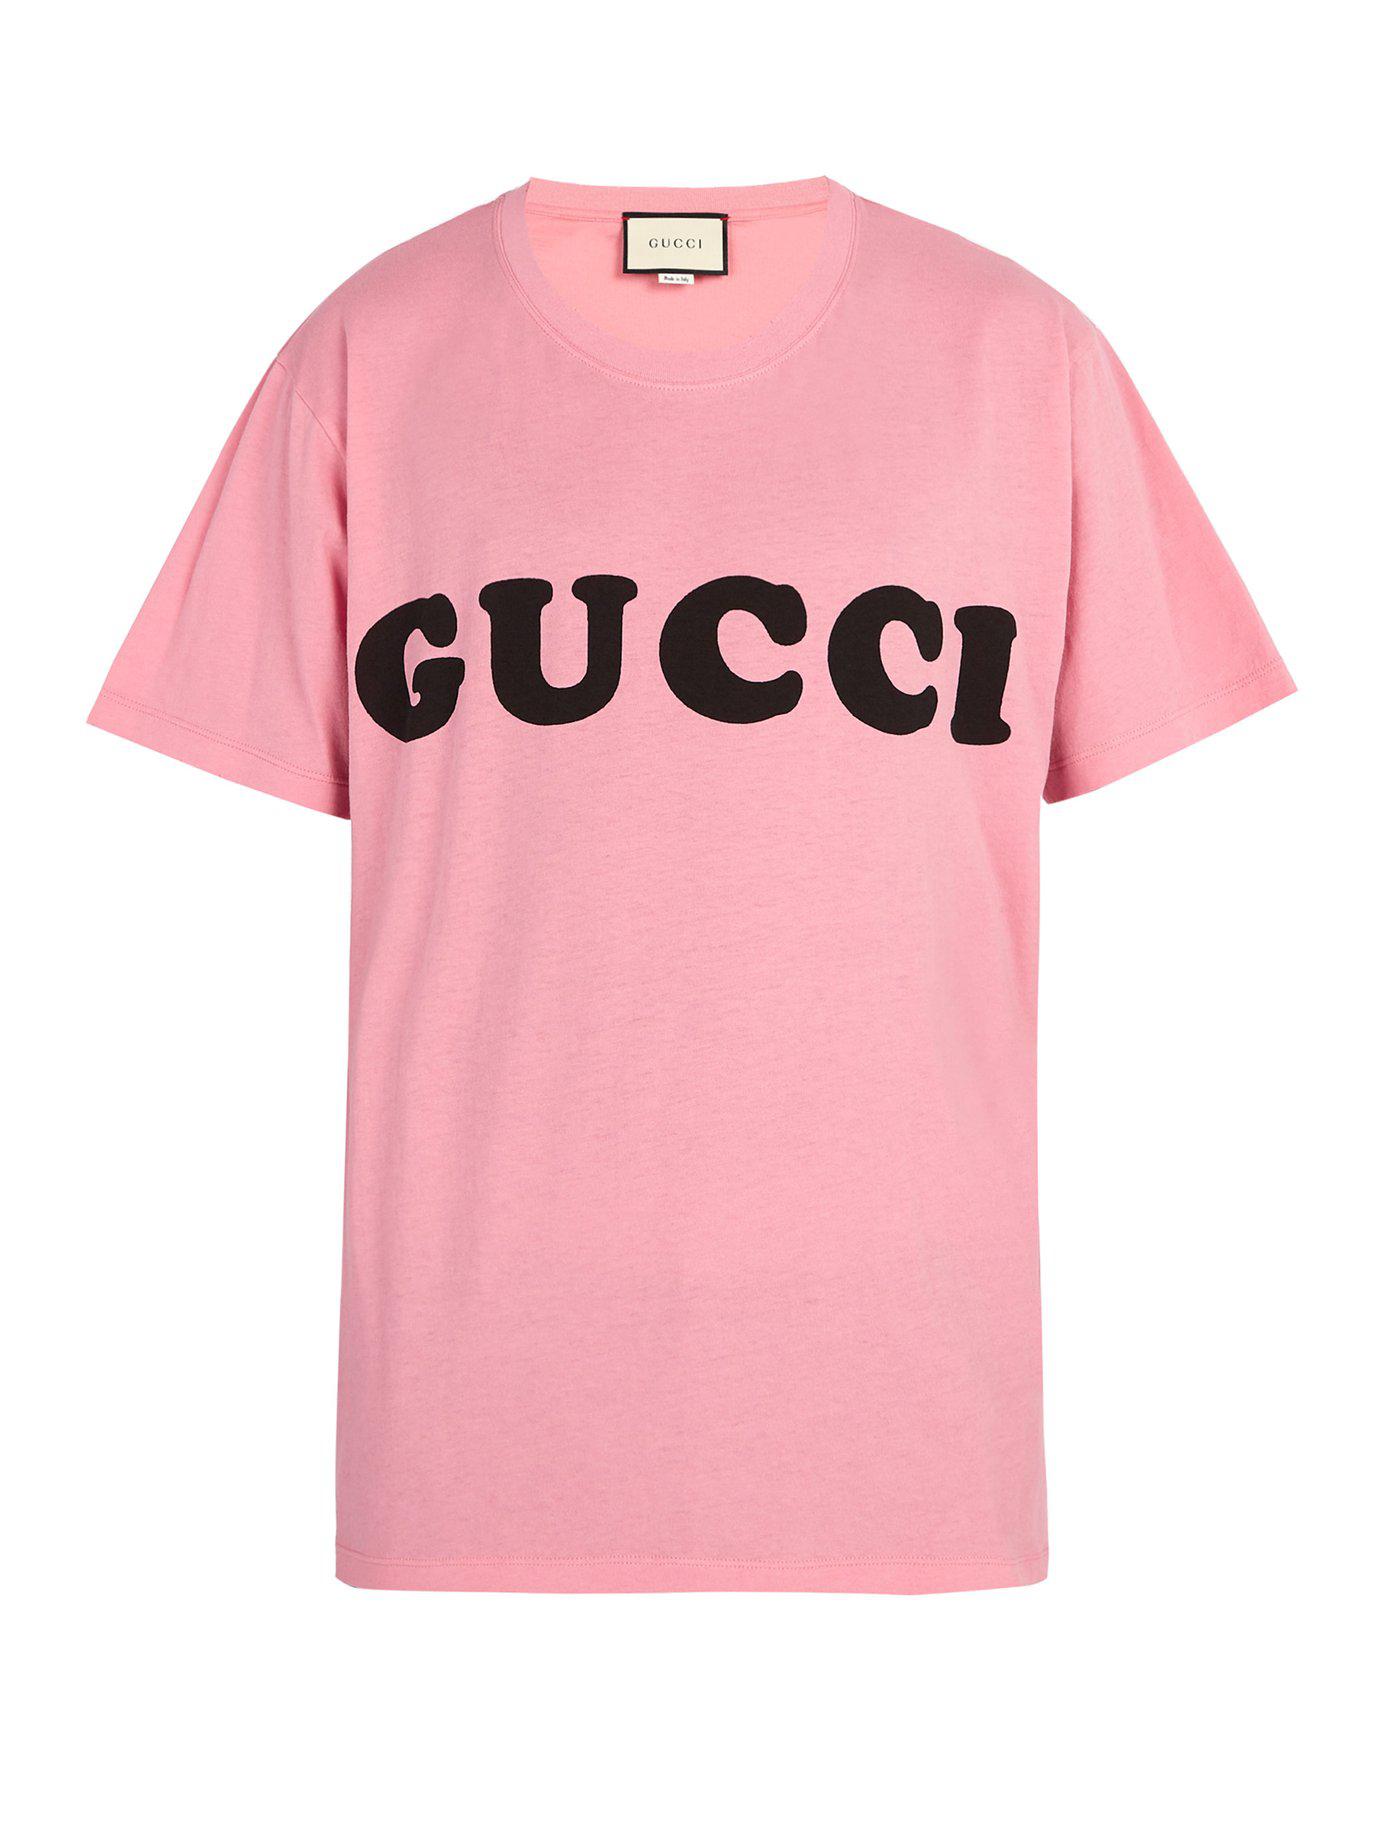 Lyst - Gucci Cotton T-shirt in Pink for Men